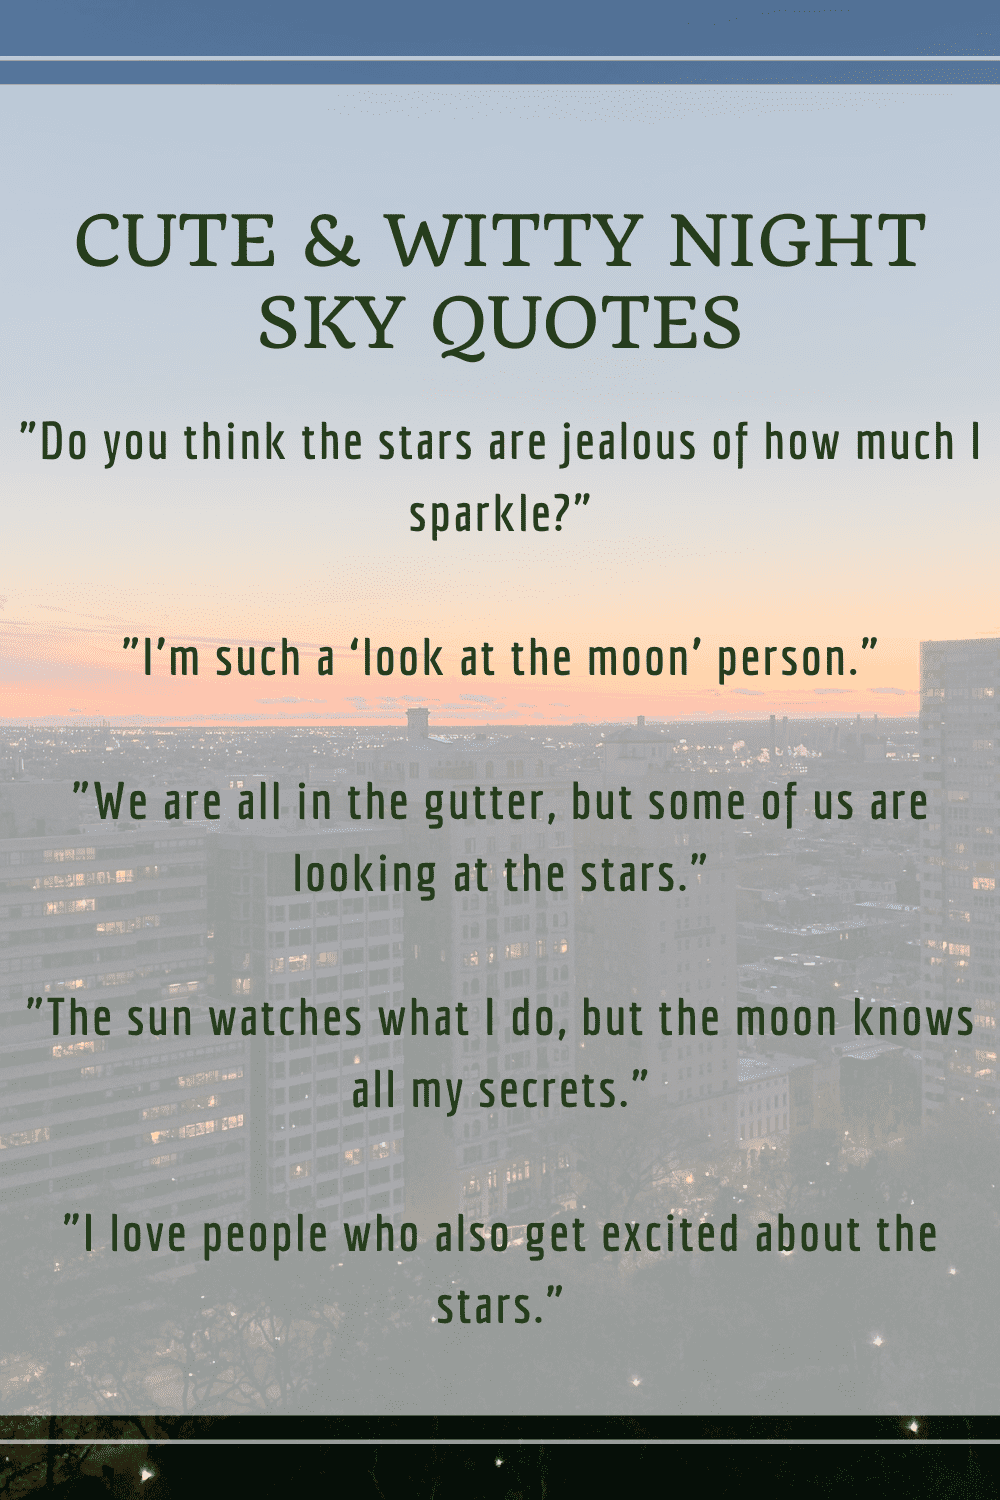 75+ Beautiful Night Sky Quotes & Captions (for Instagram & More!)